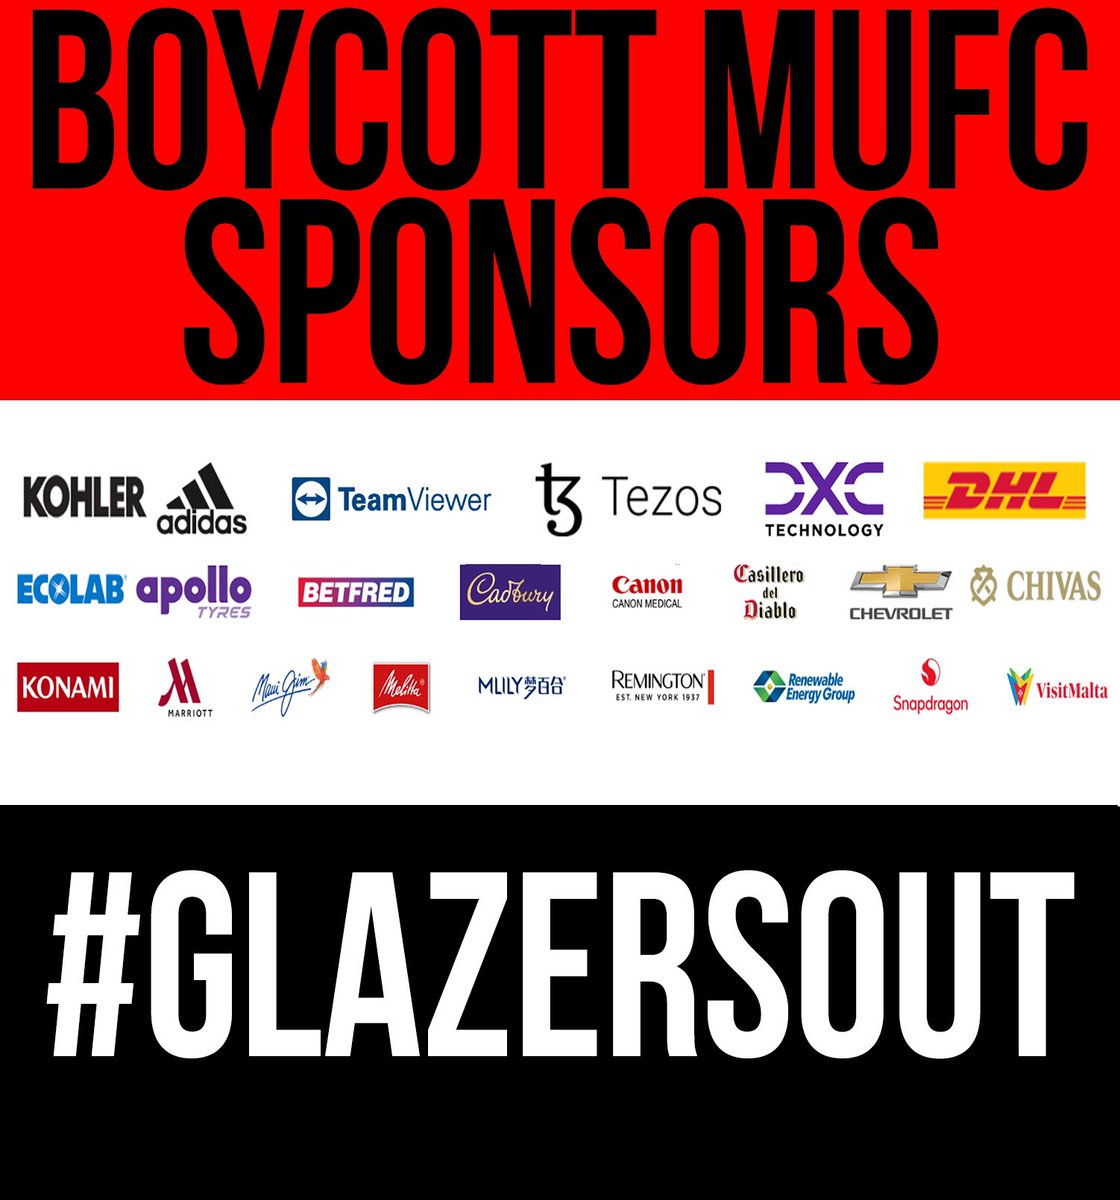 We need to take action !!!
If the Glazers are still running the show after Friday we are doomed for the next 20 years!!!
Stop buying shirts and anything of the MU Shop and Megastore!!!
#GlazersOut 
#FullSaleOnly